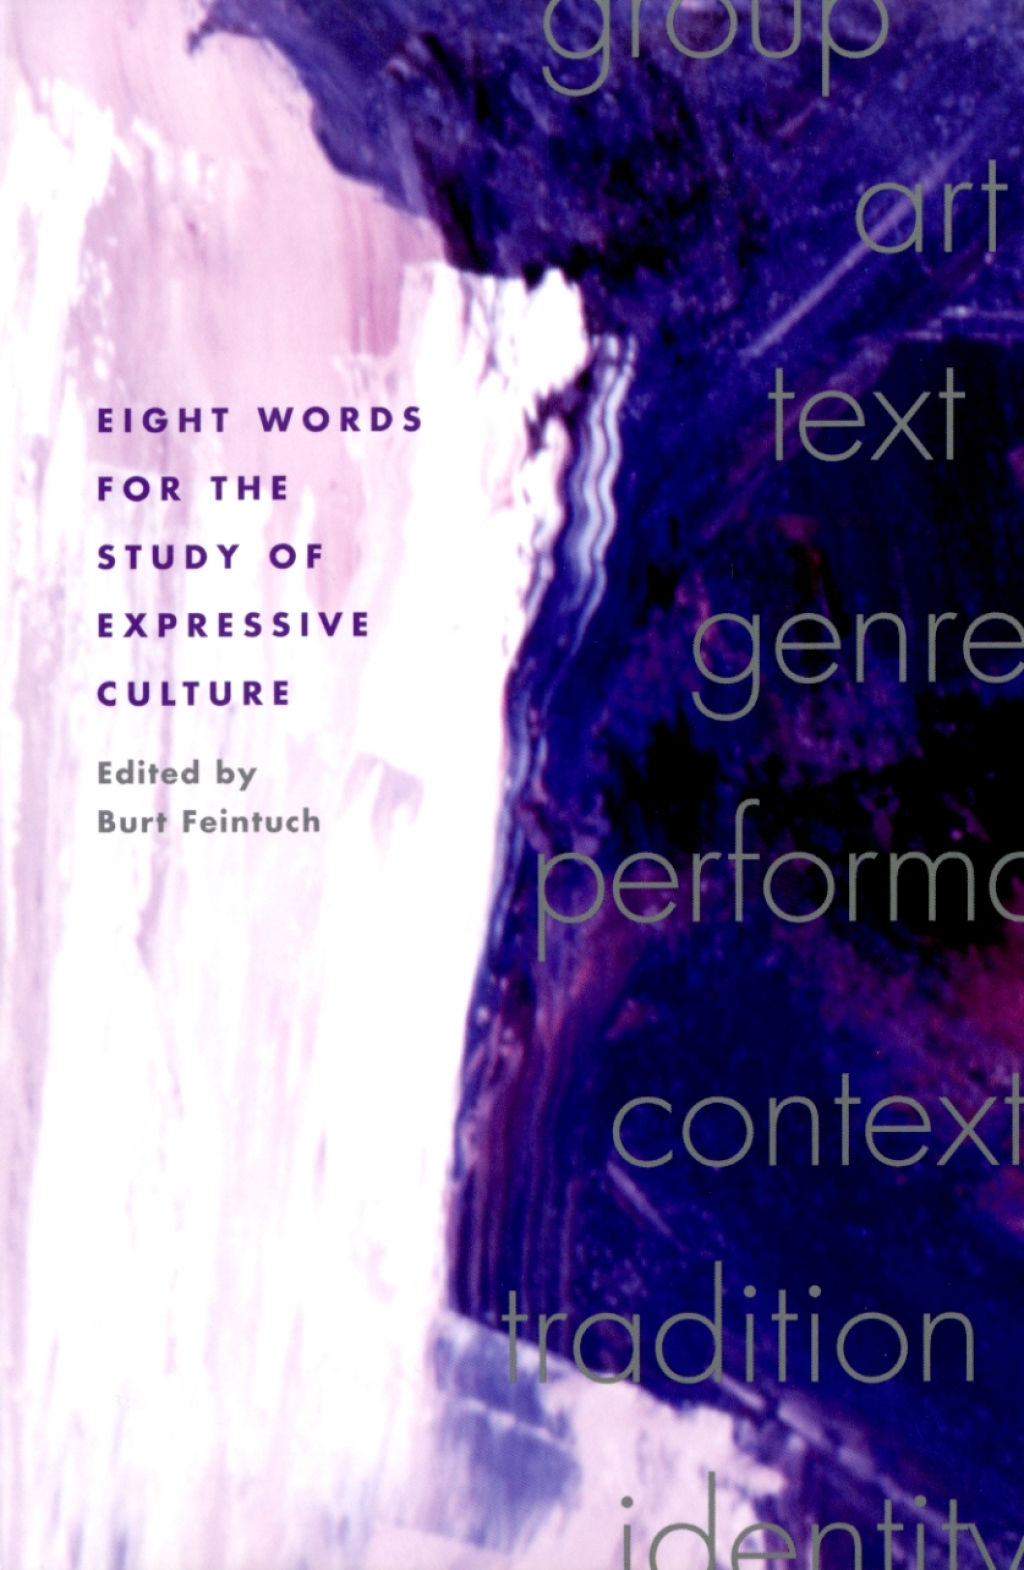 Eight Words for the Study of Expressive Culture (eBook) - Burt Feintuch,